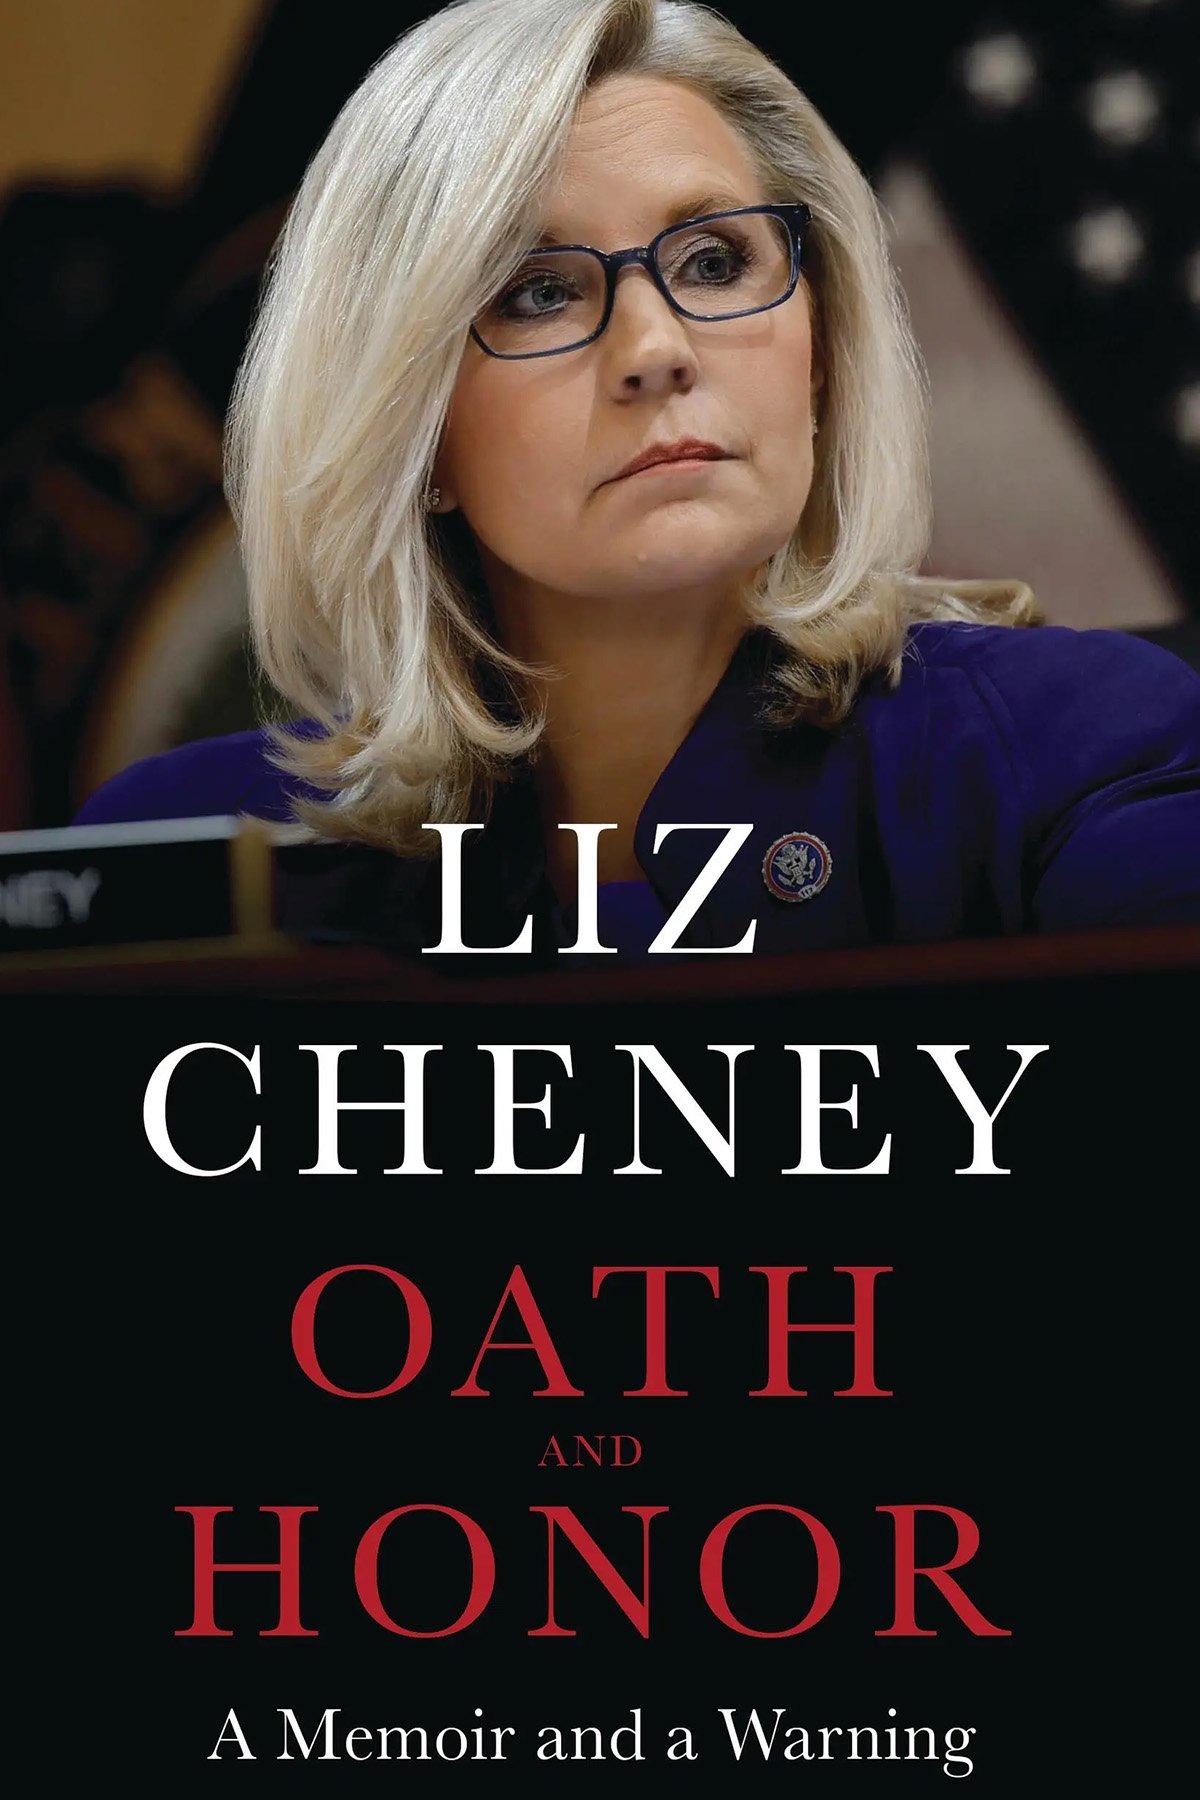 Liz Cheney's book "Oath and Honor: A memoir and a Warning"